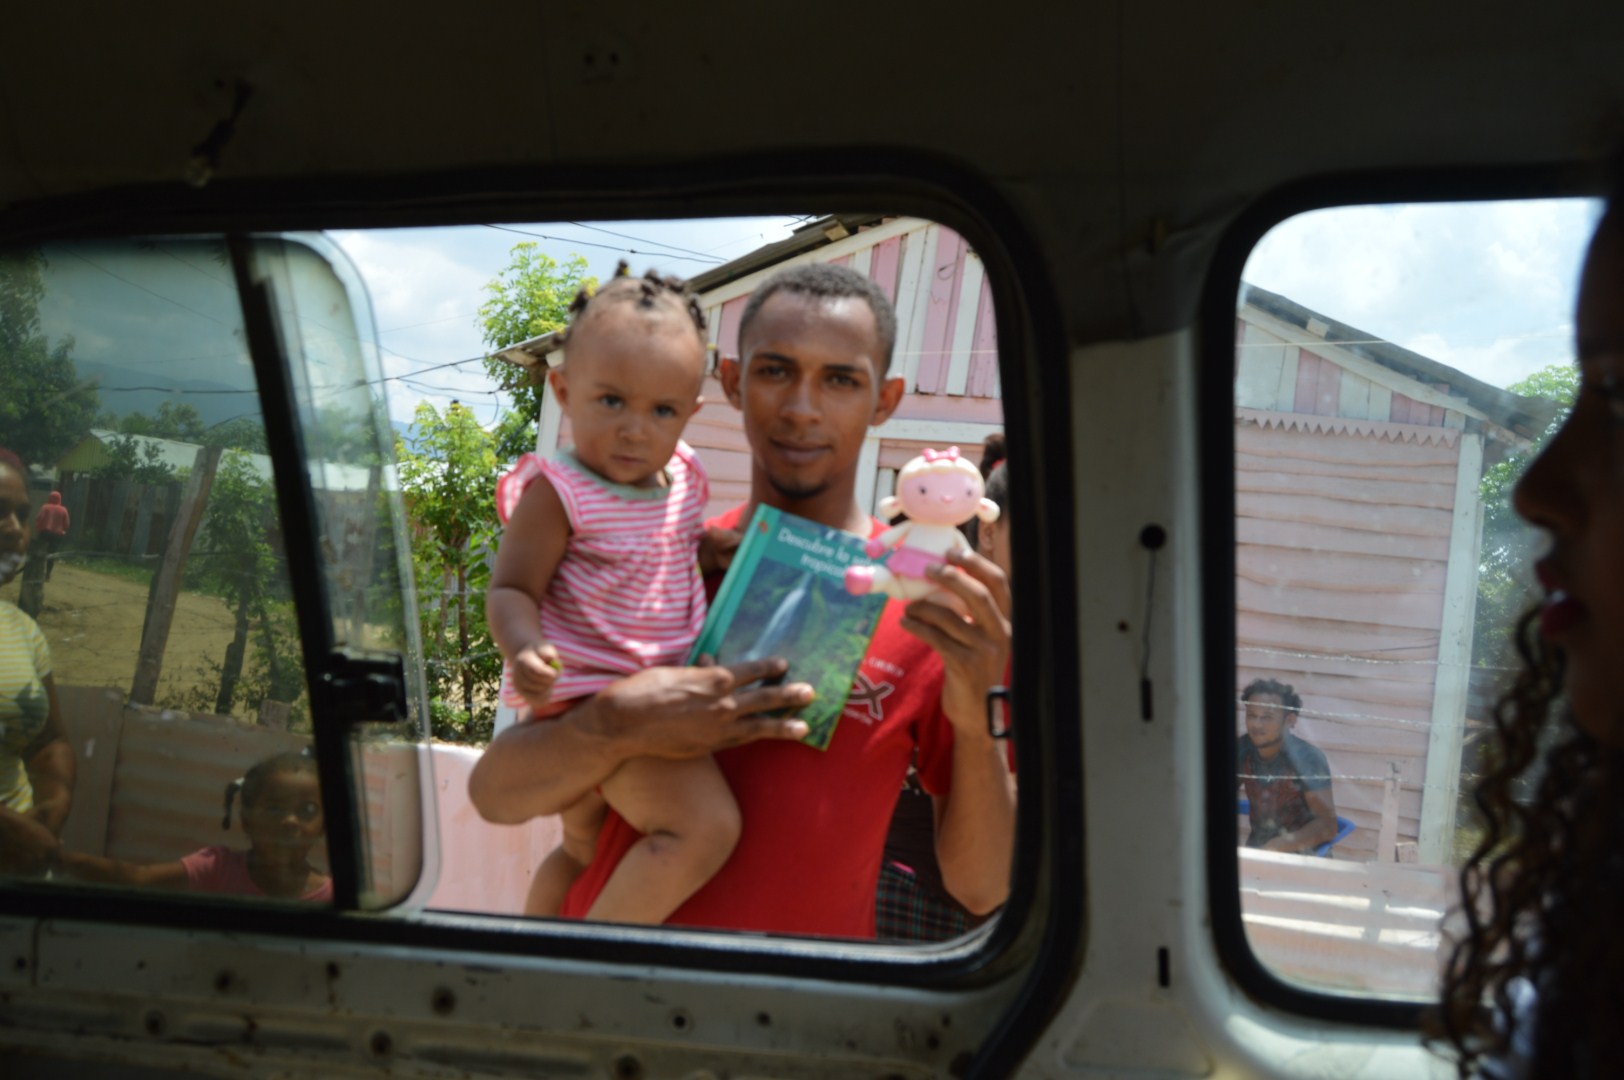 A man carrying a little girl holding a book and a toy outside the car’s window